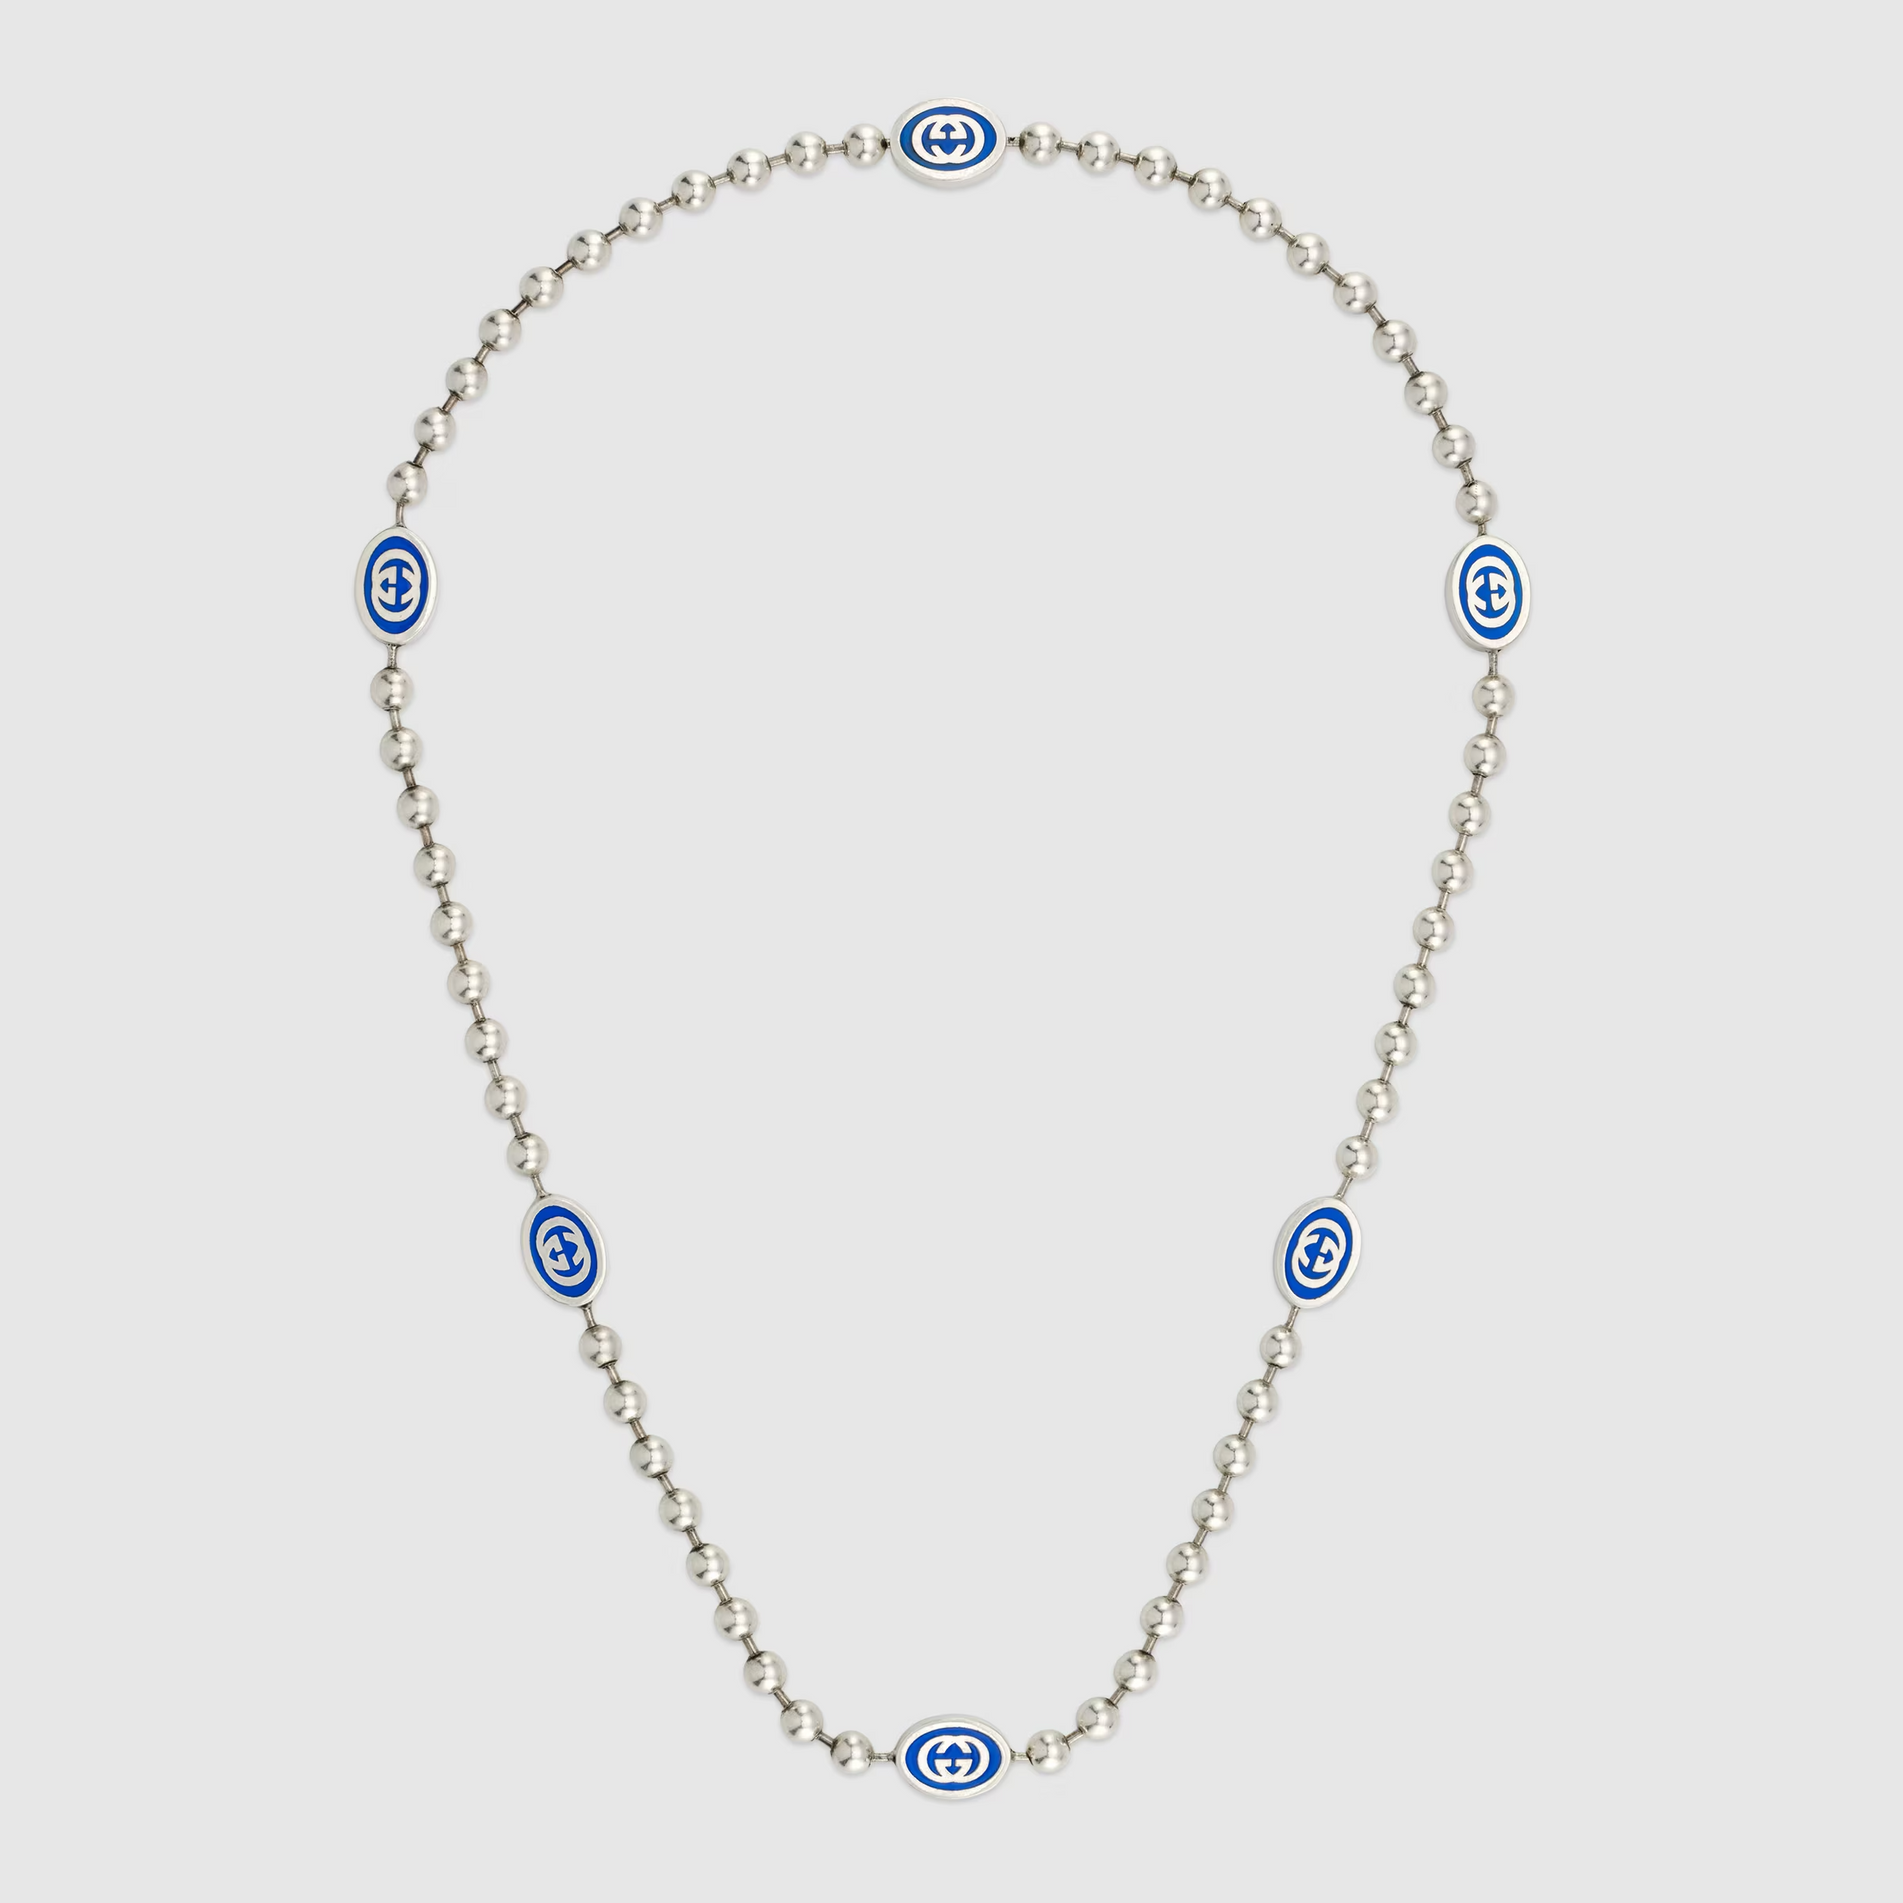 Gucci Interlocking G Boule Chain Necklace in Silver with Blue Enamel - Orsini Jewellers